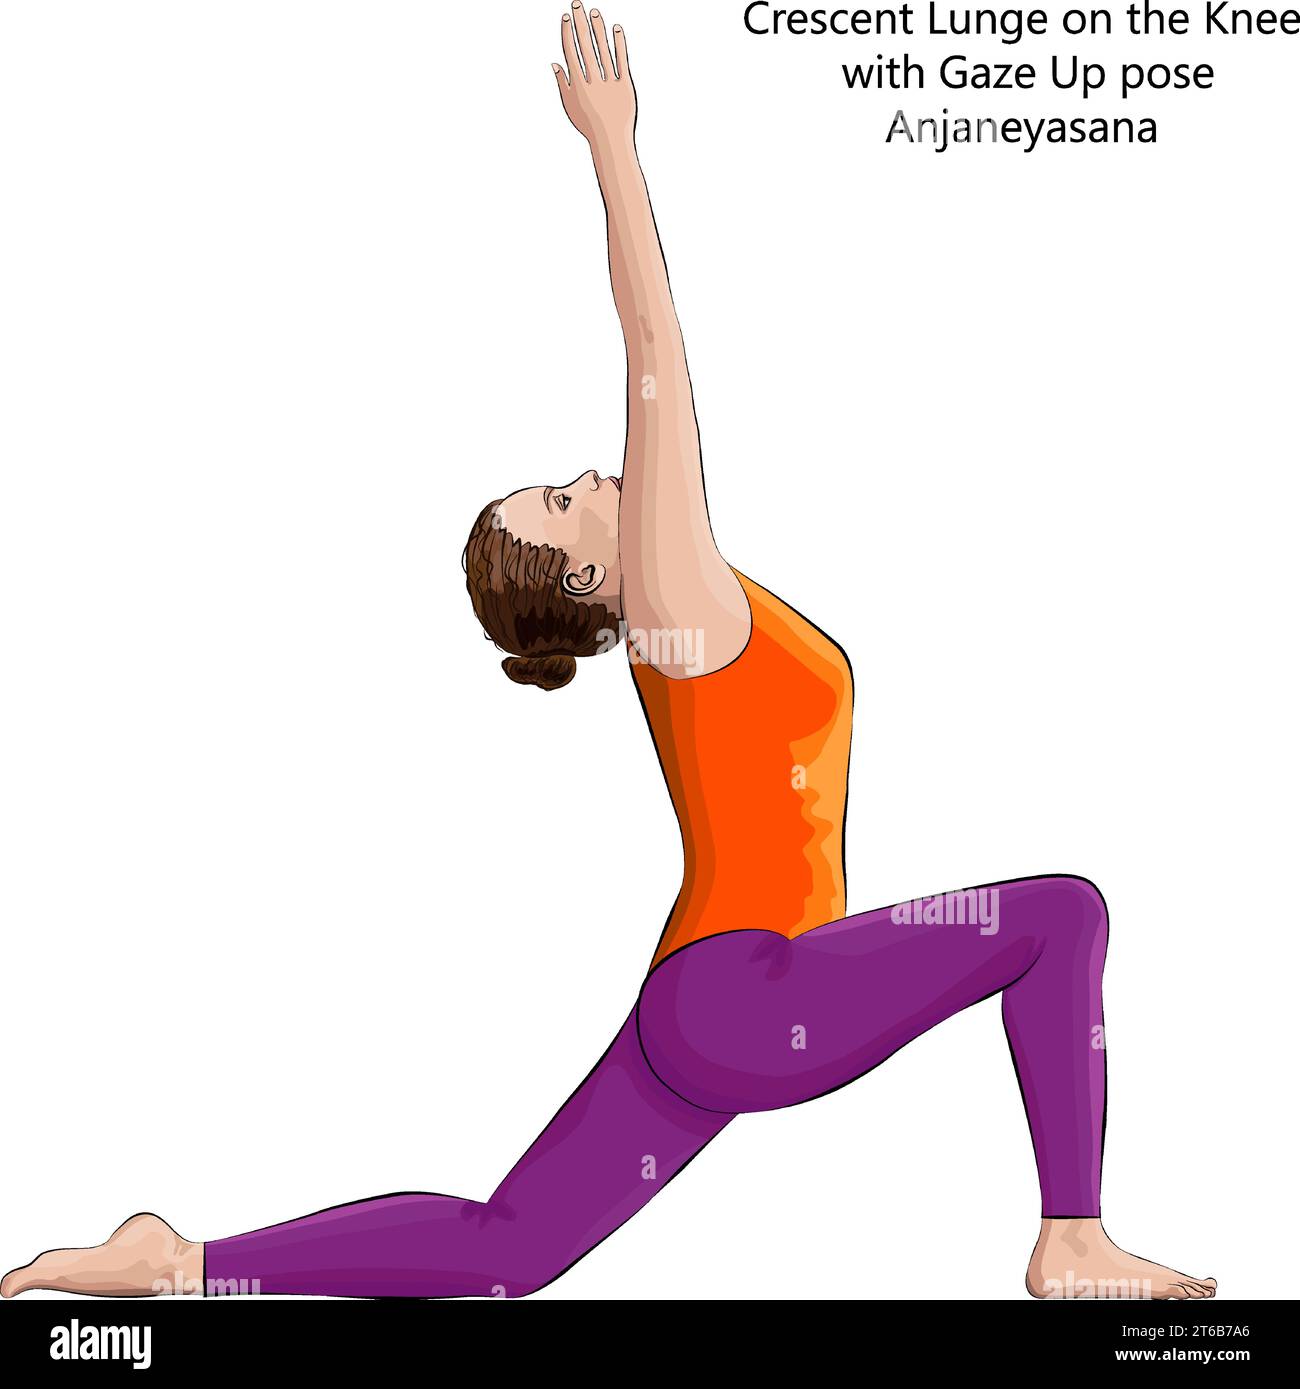 Health Benefits of Legs Up the Wall Pose | POPSUGAR Fitness